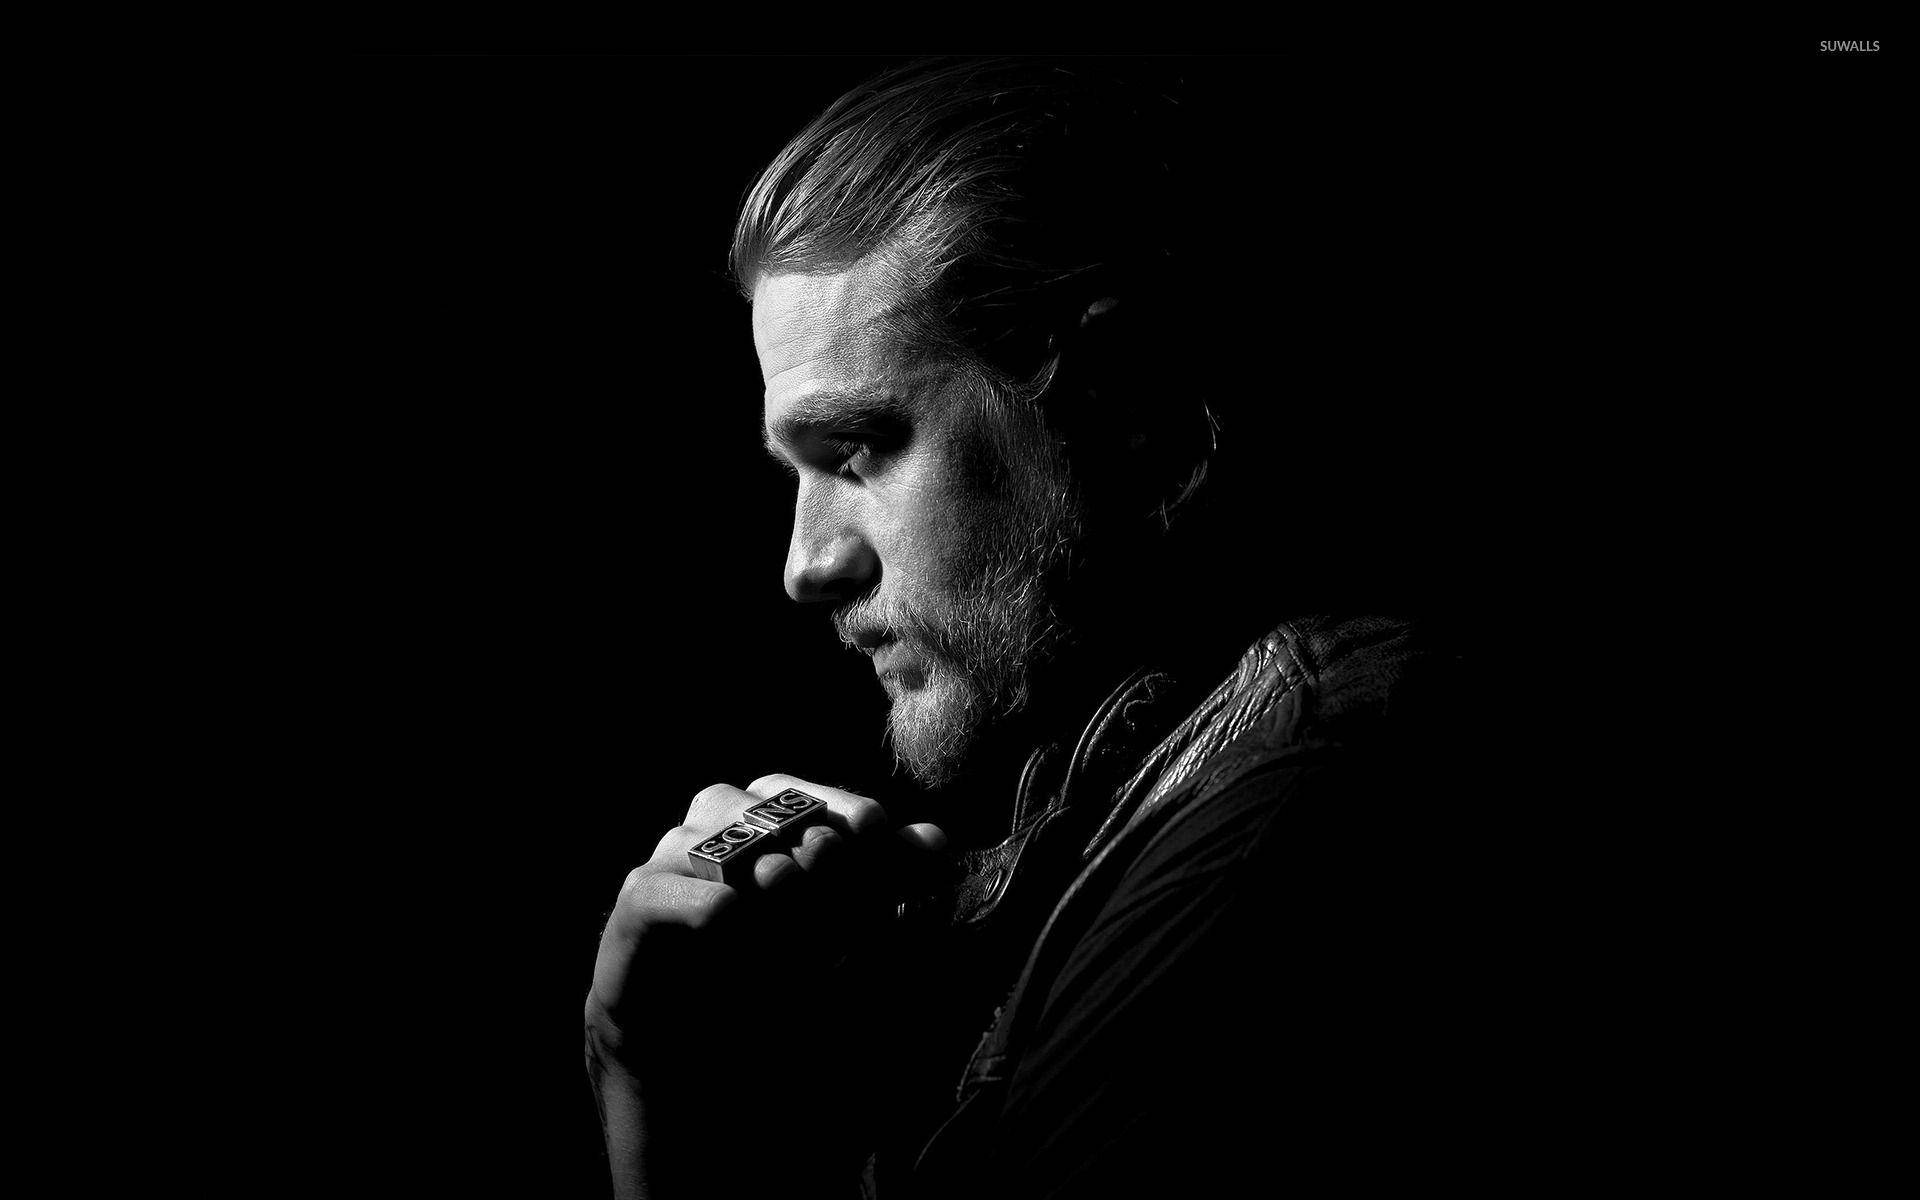 Sons Of Anarchy: A Tale Of Brotherhood Background